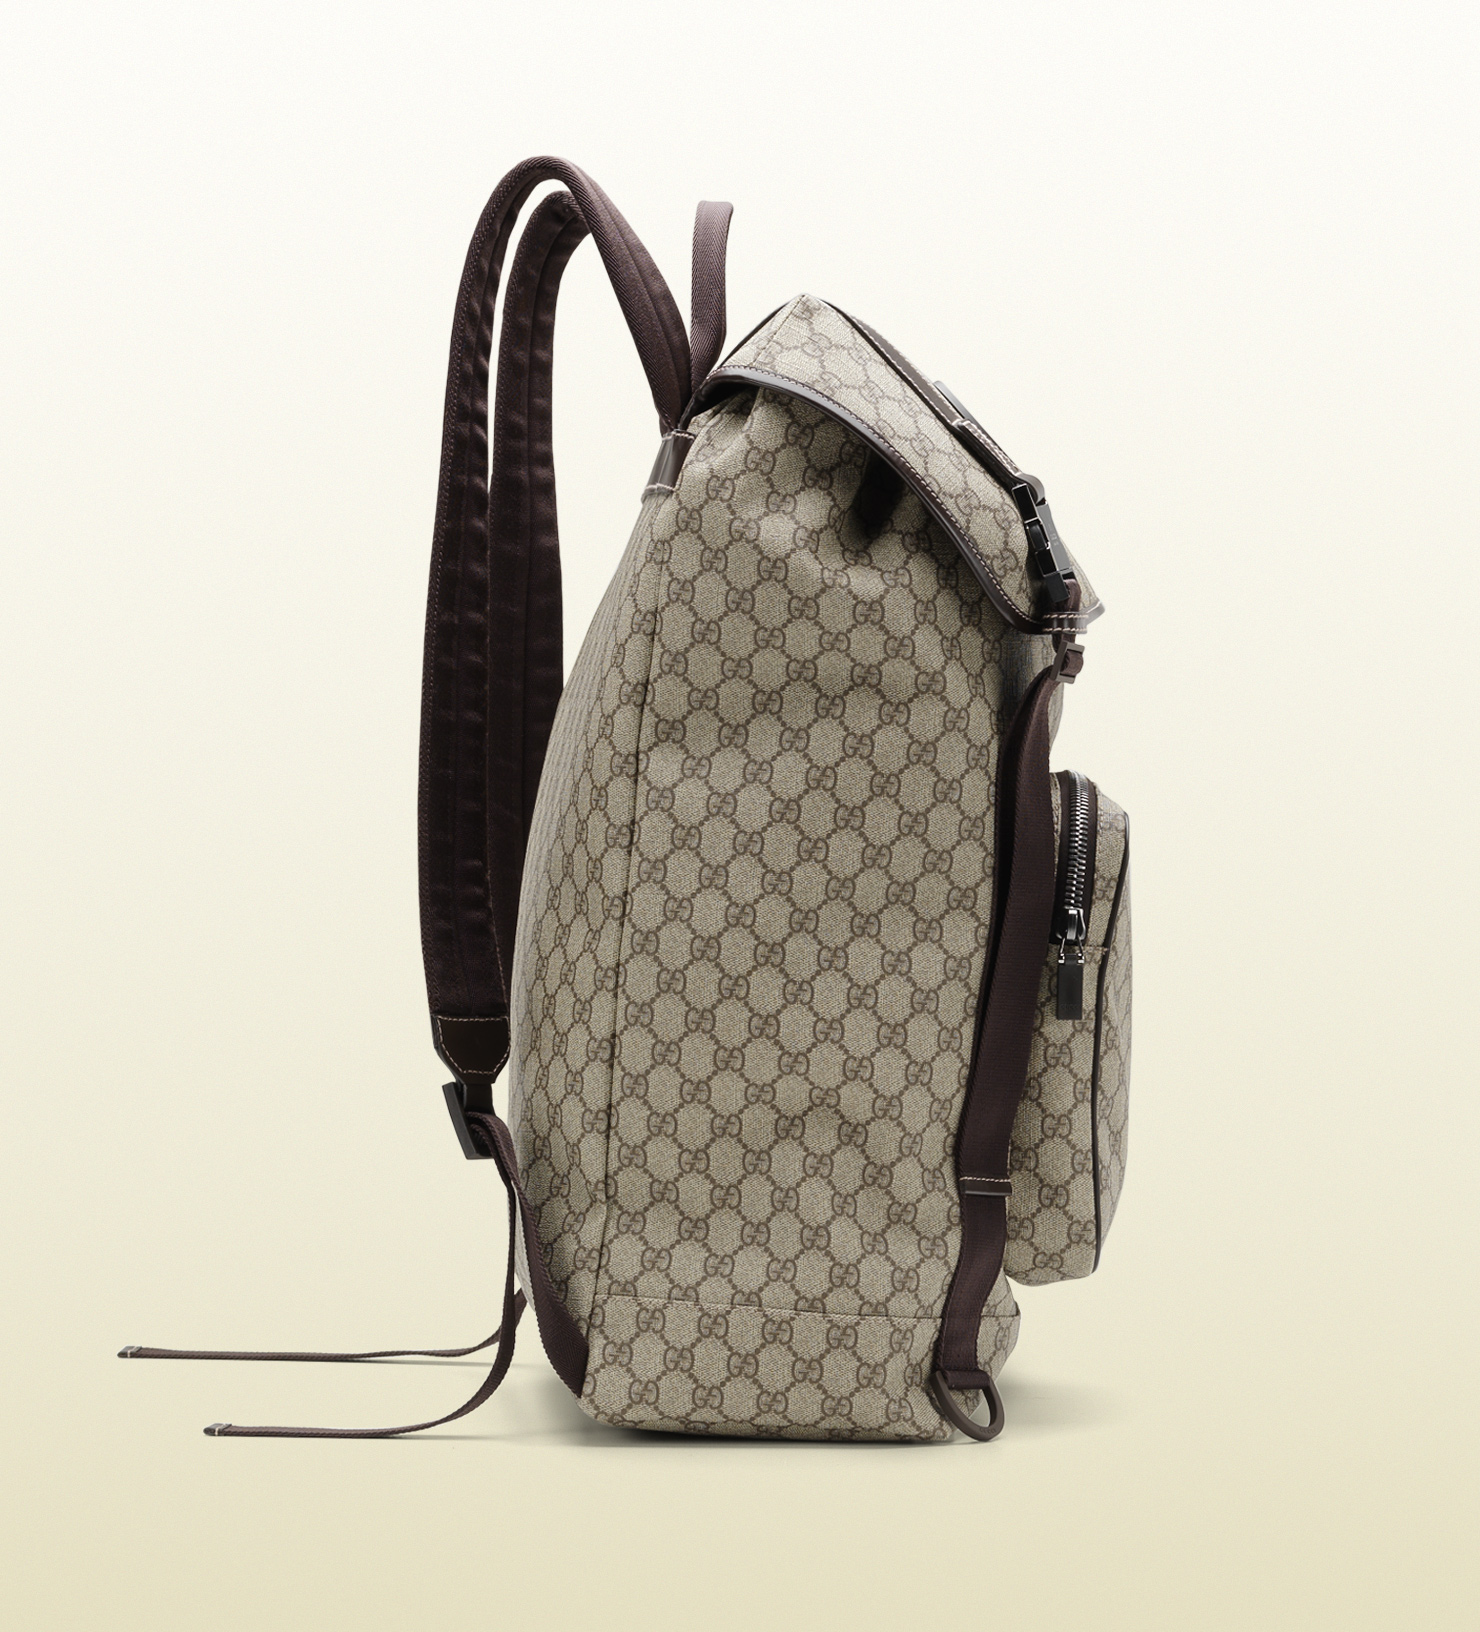 Gucci Gg Supreme Canvas Interlocking G Backpack in Beige (Gray) for Men - Lyst